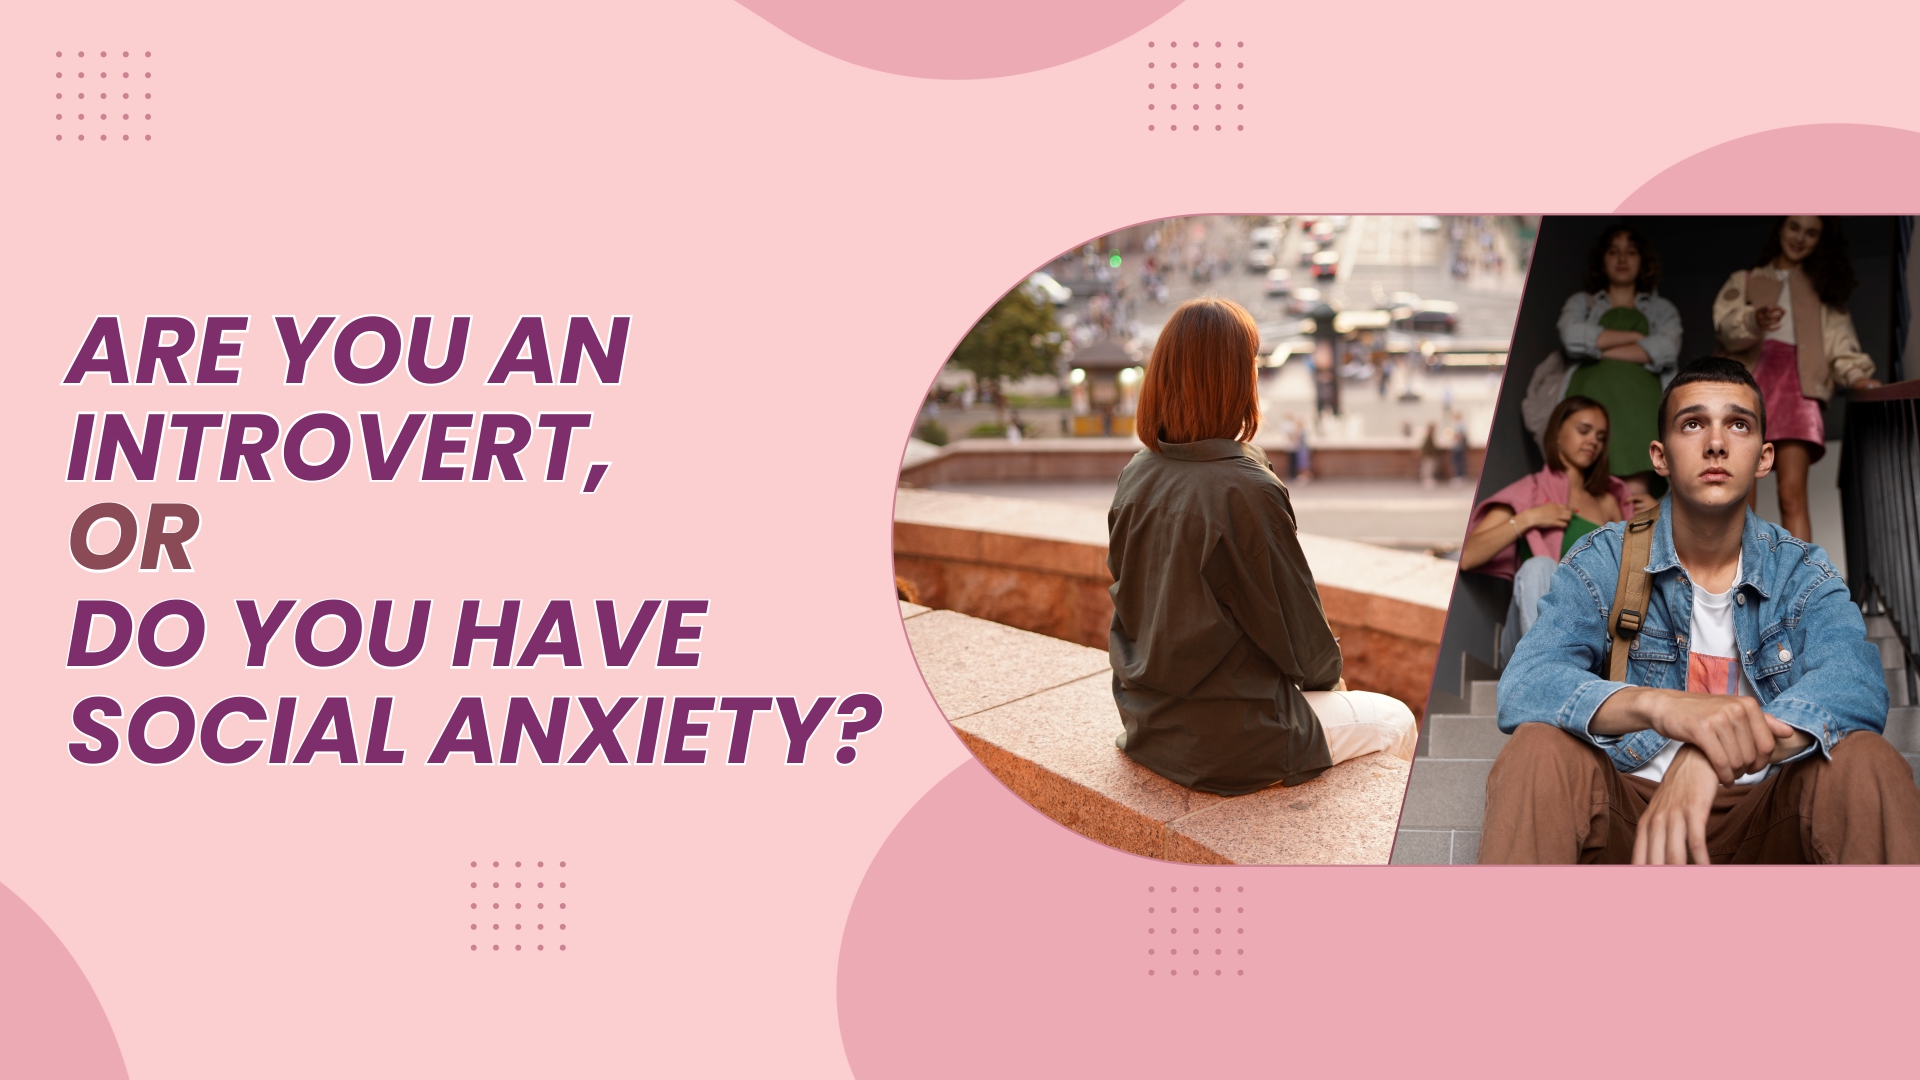 Are You an Introvert, or Do You Have Social Anxiety?